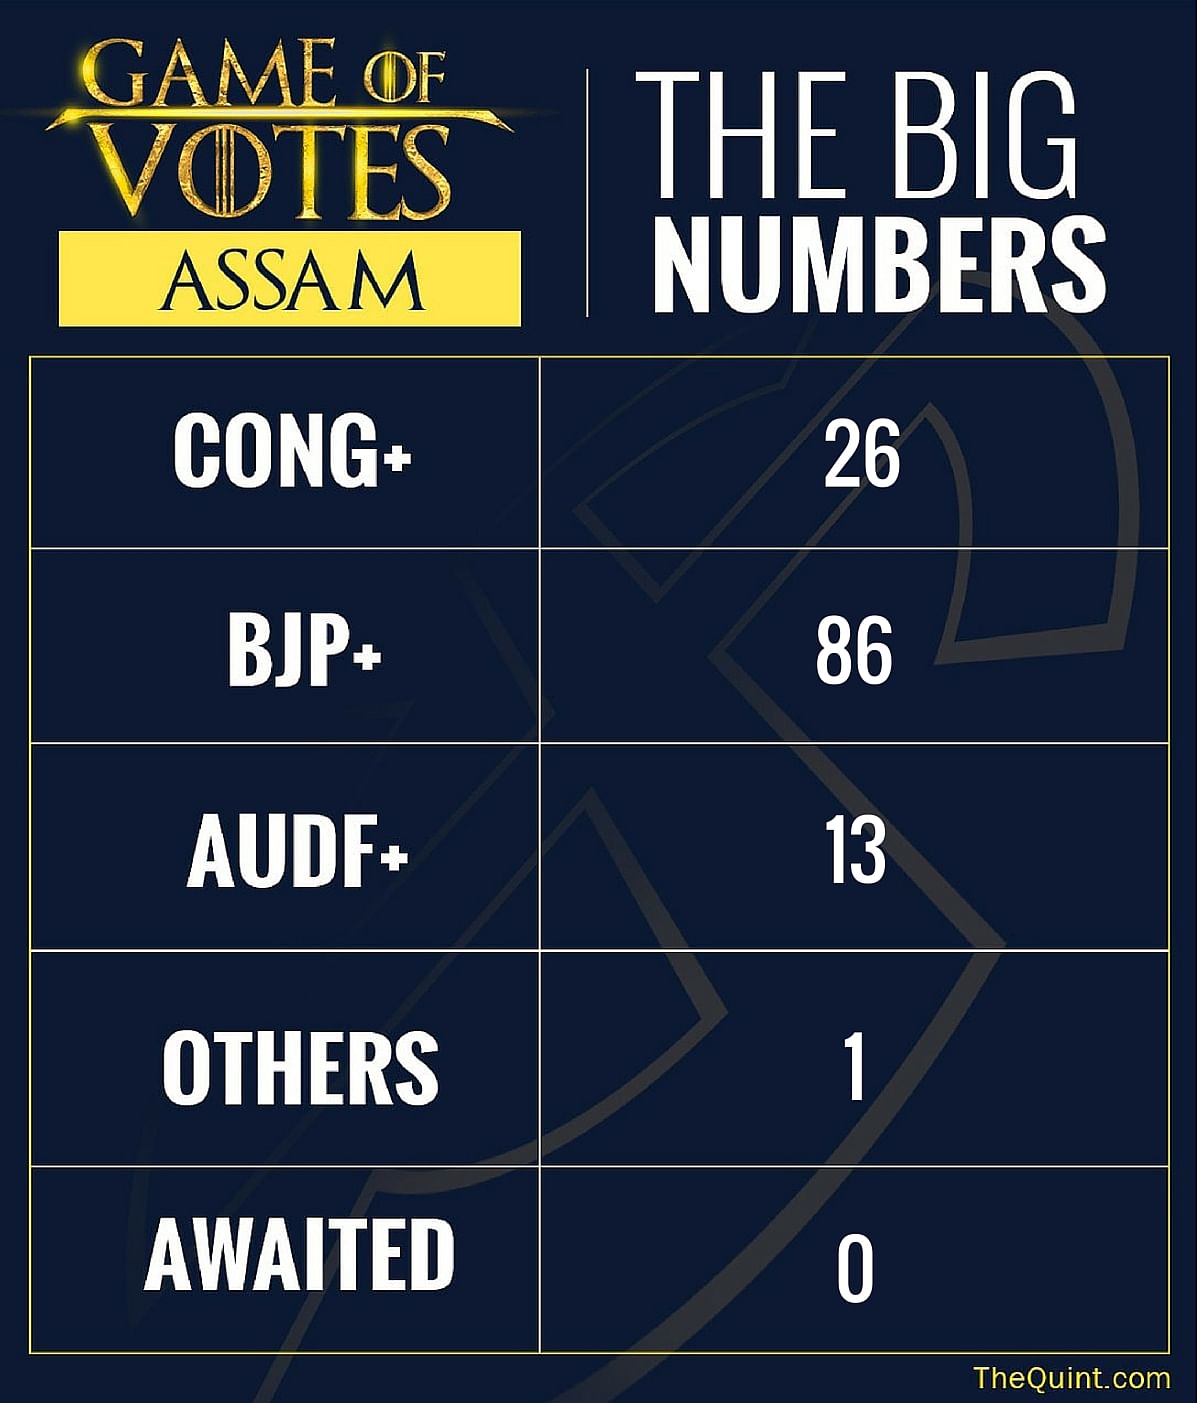 The counting of votes for the Assam assembly elections has begun.